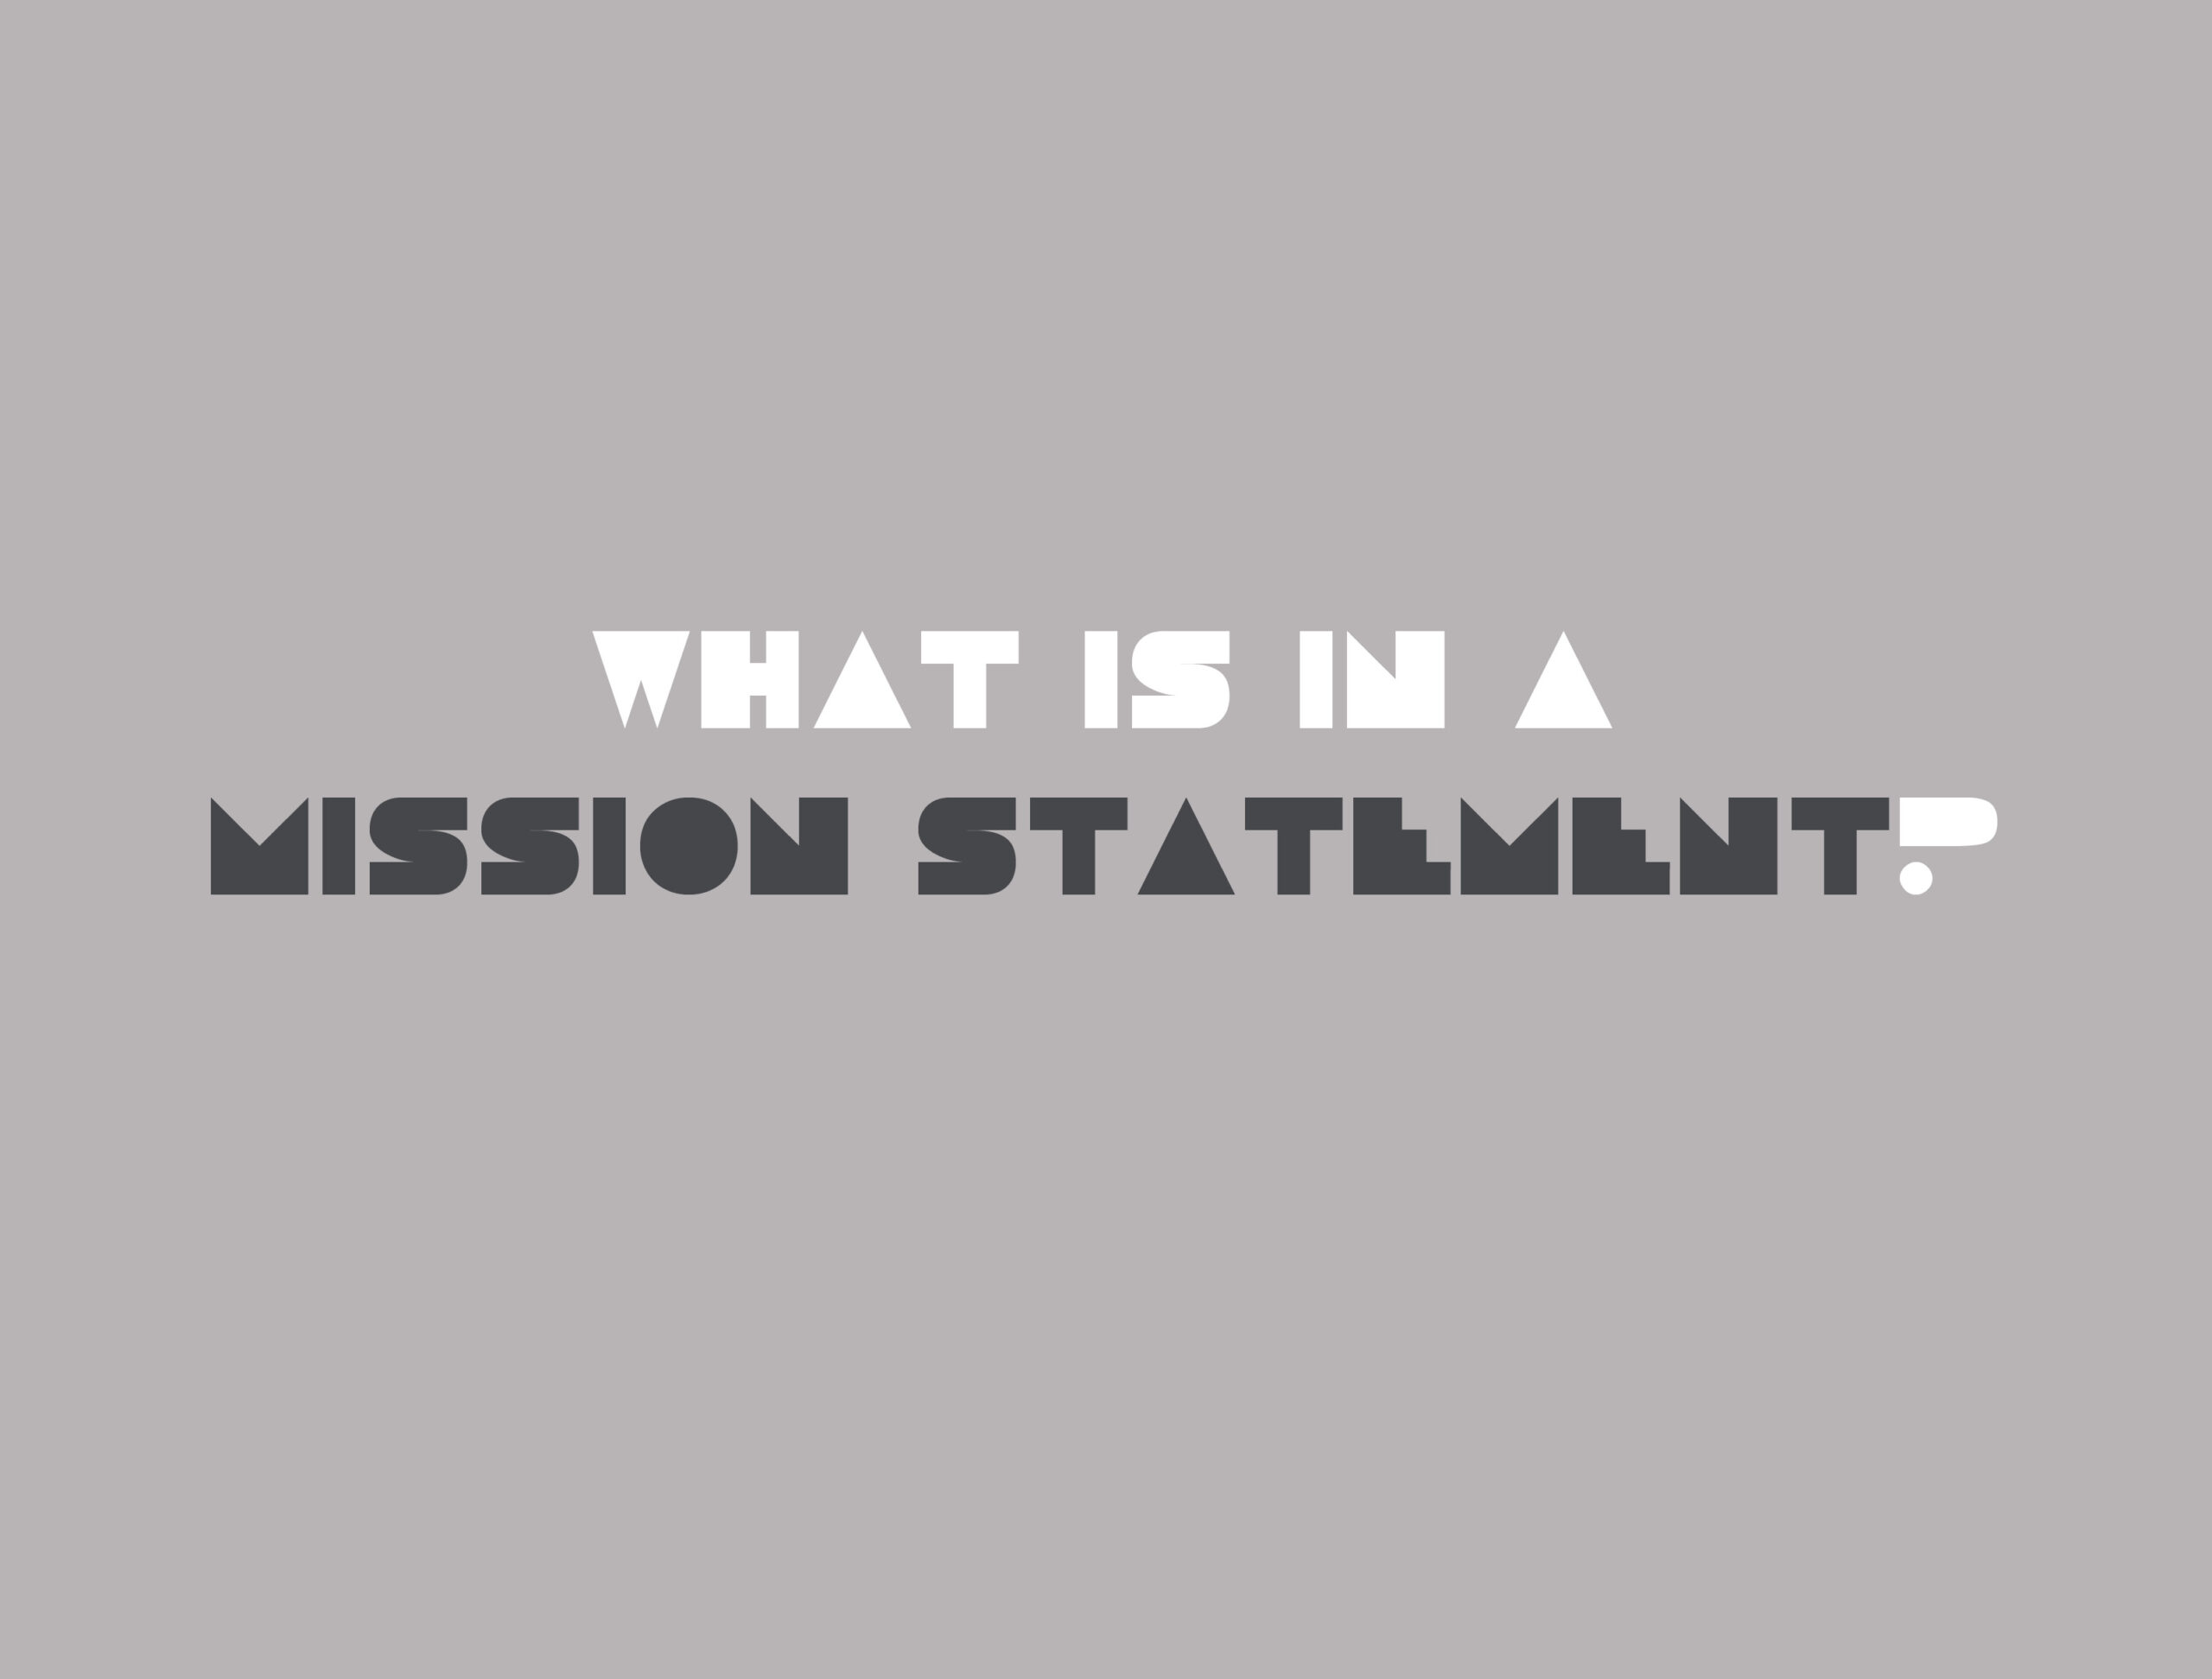 What’s in a mission statement?